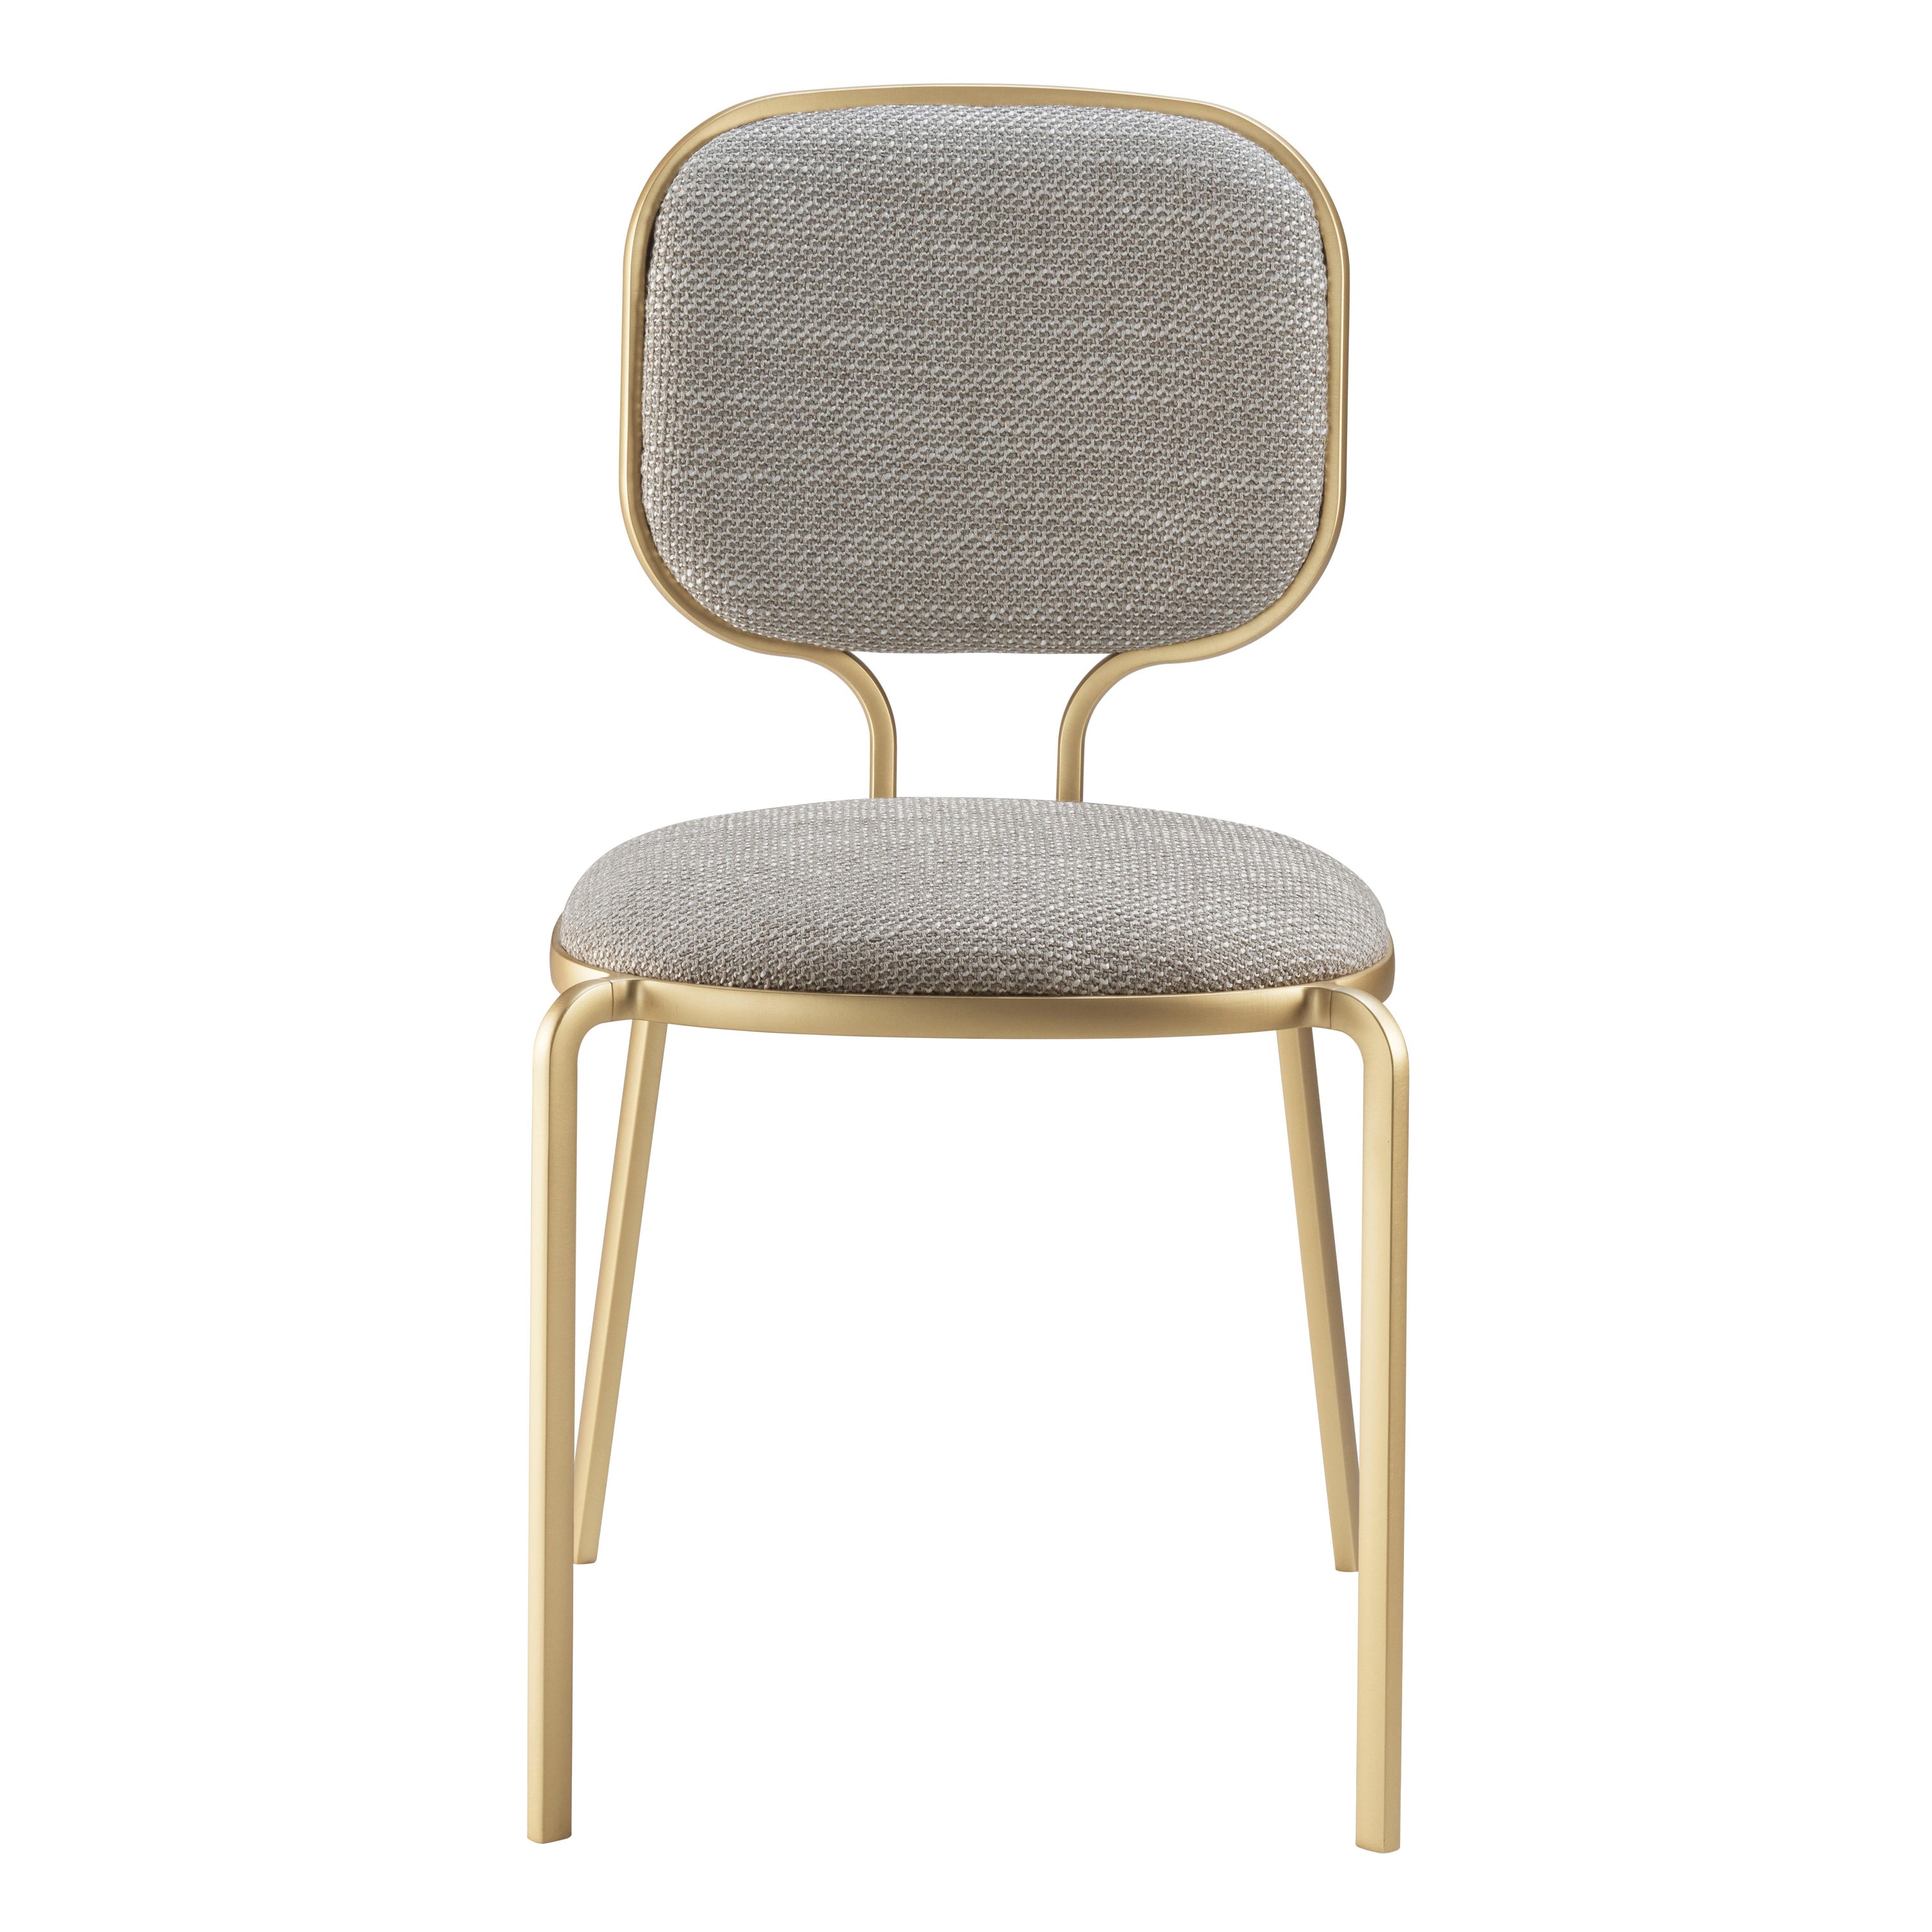 Liù Chair Fabric Bogardine Colour 03 Perla, Satin Brass Structure, Made in Italy For Sale